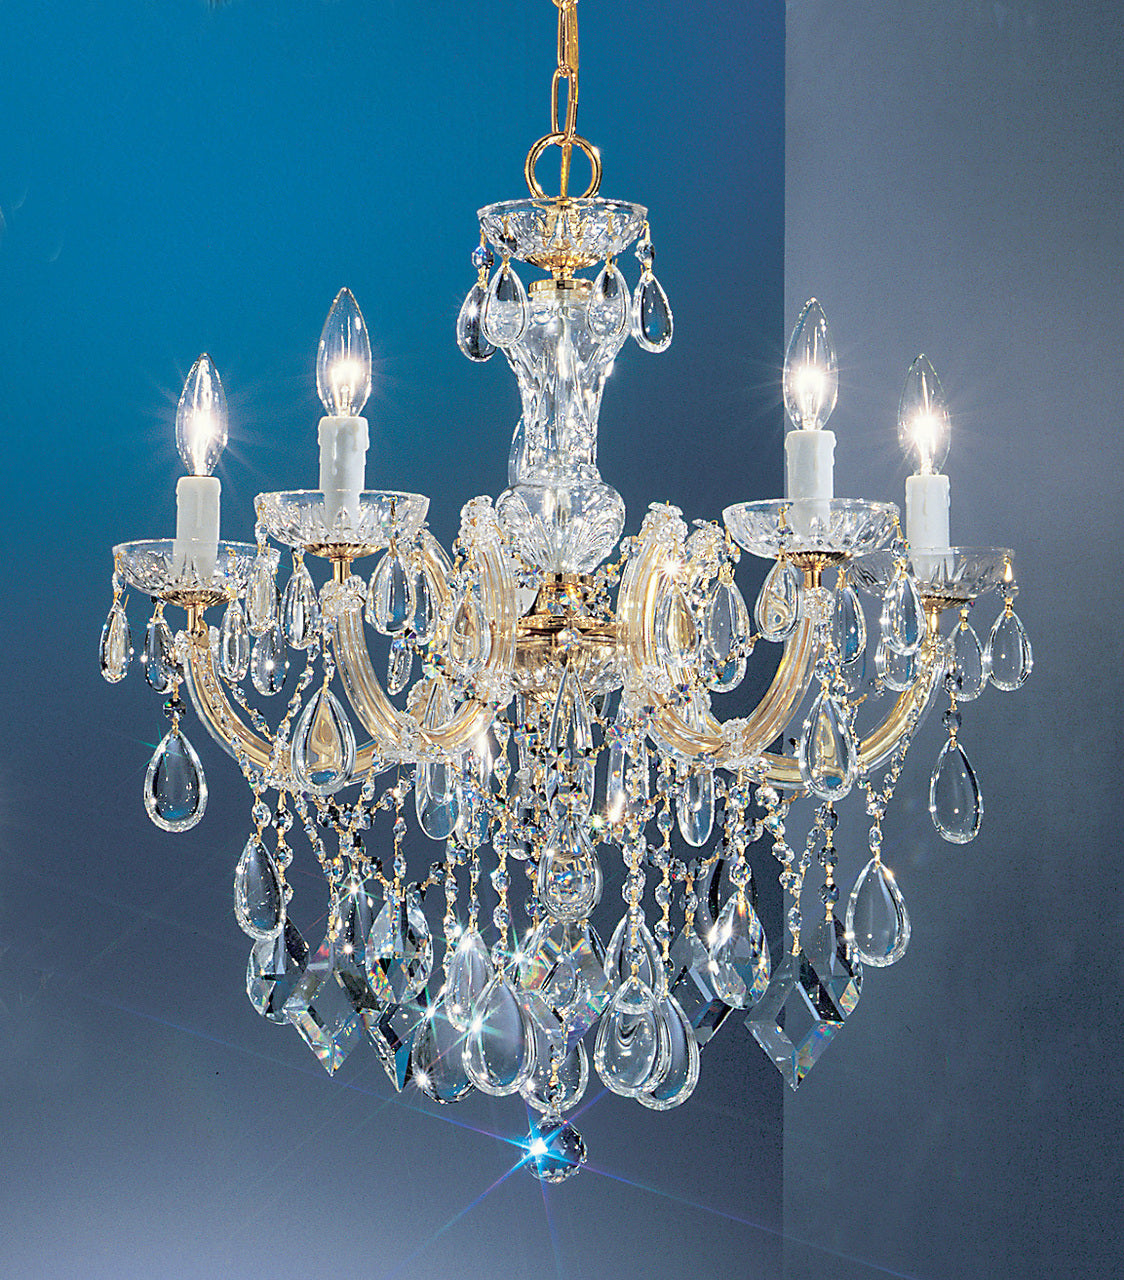 Classic Lighting 8355 GP C Rialto Contemporary Crystal Chandelier in Gold